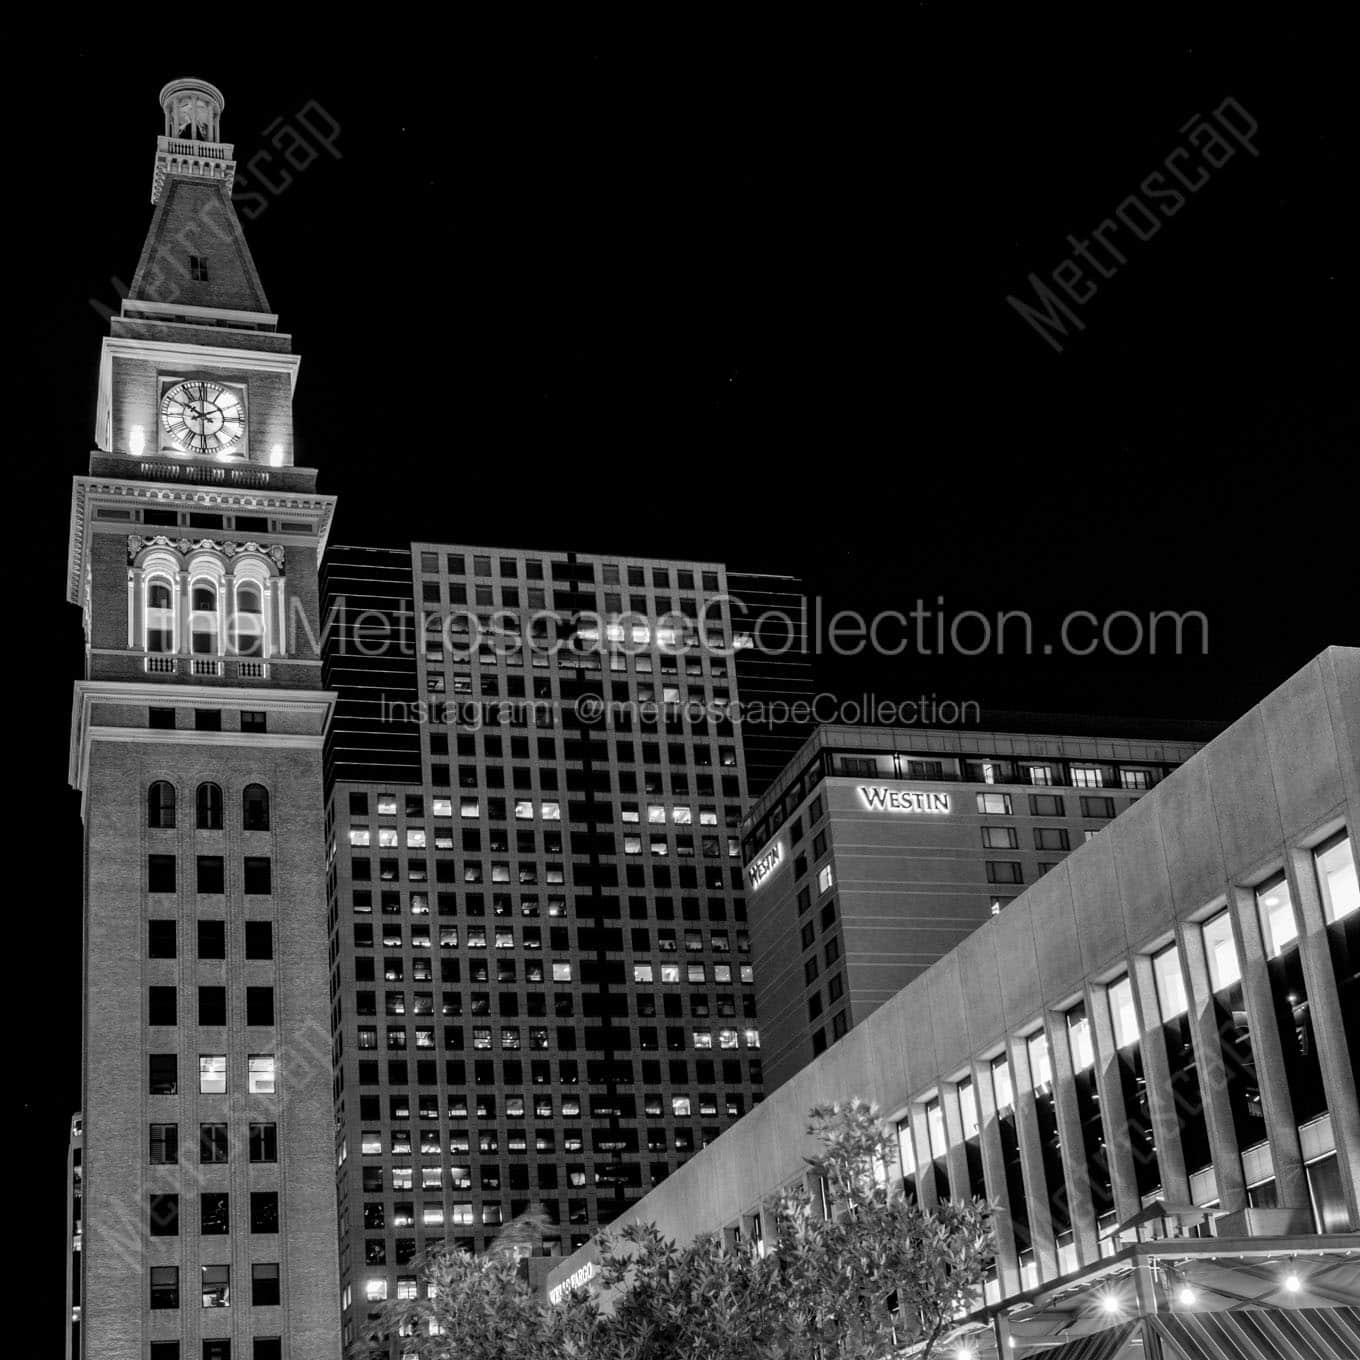 daniels and fisher building at night Black & White Office Art